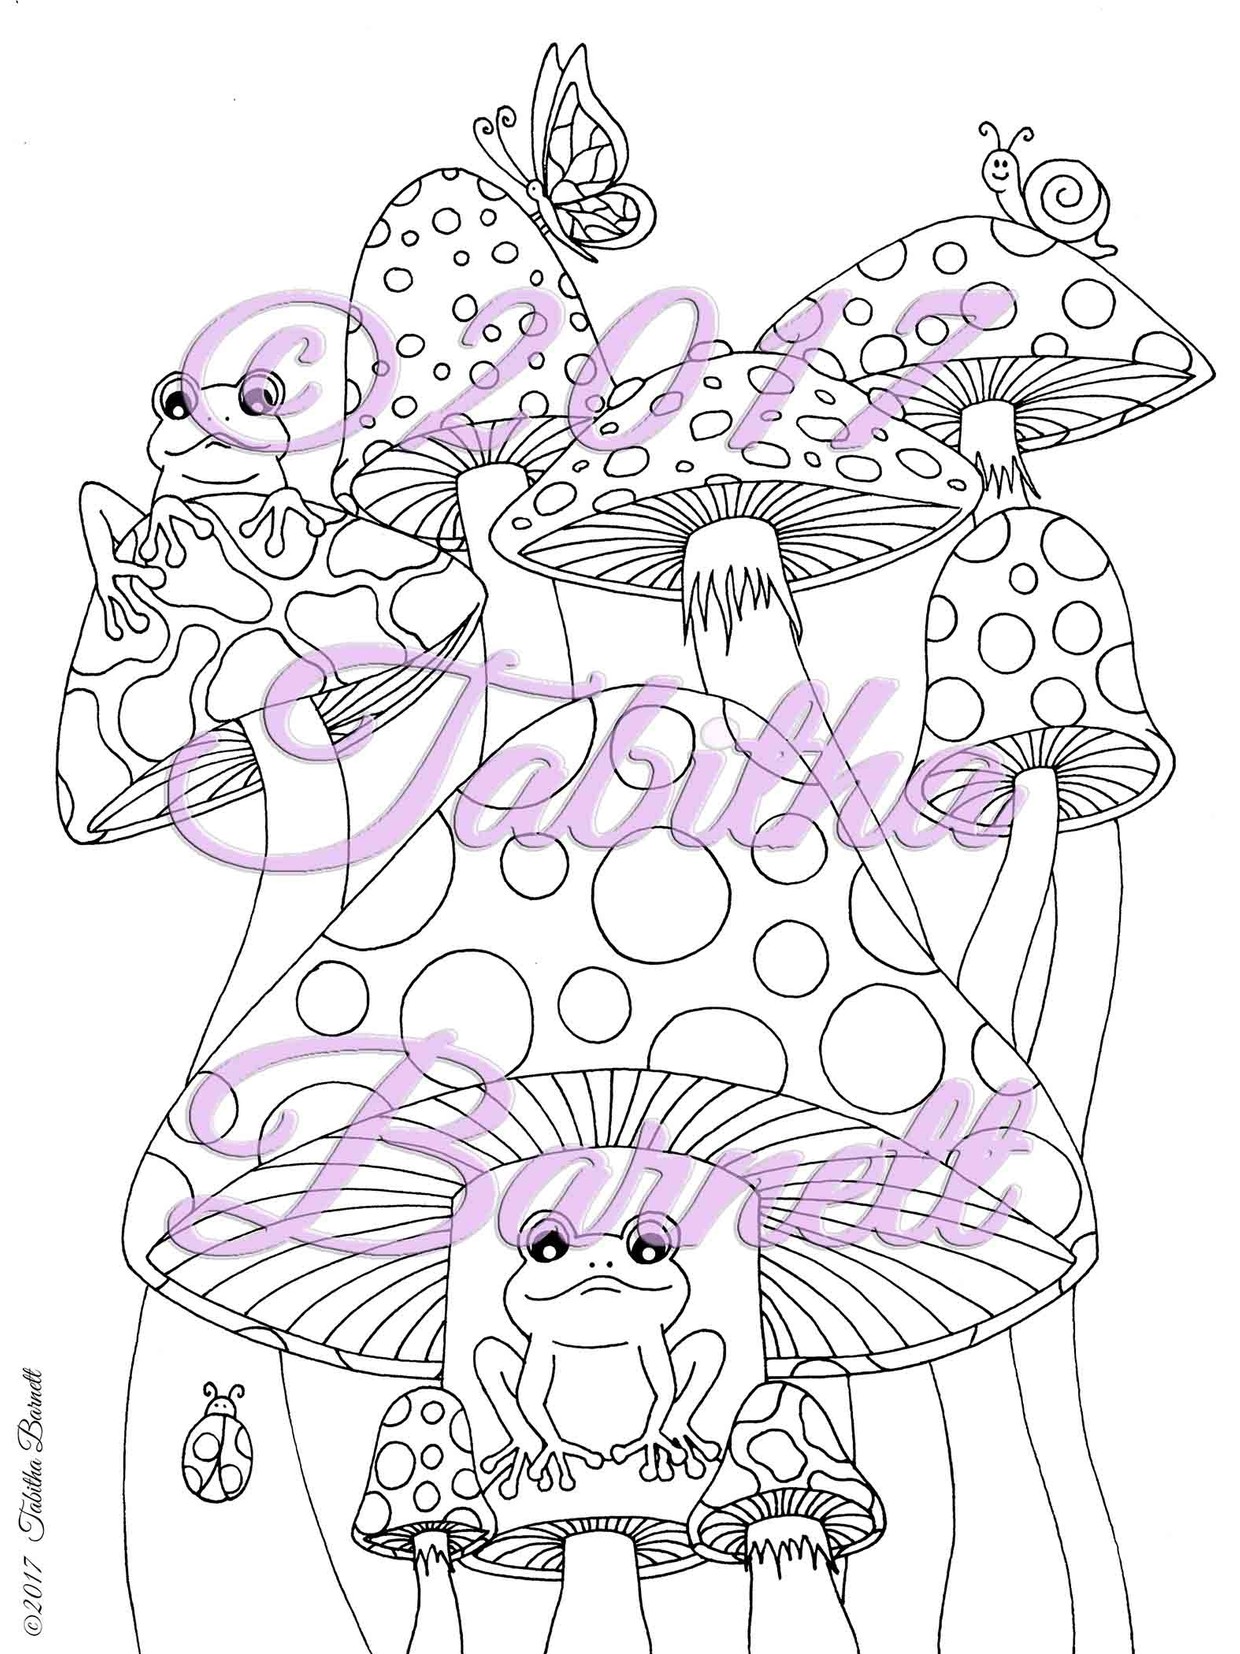 Shrooms and frogs adult coloring page jpg